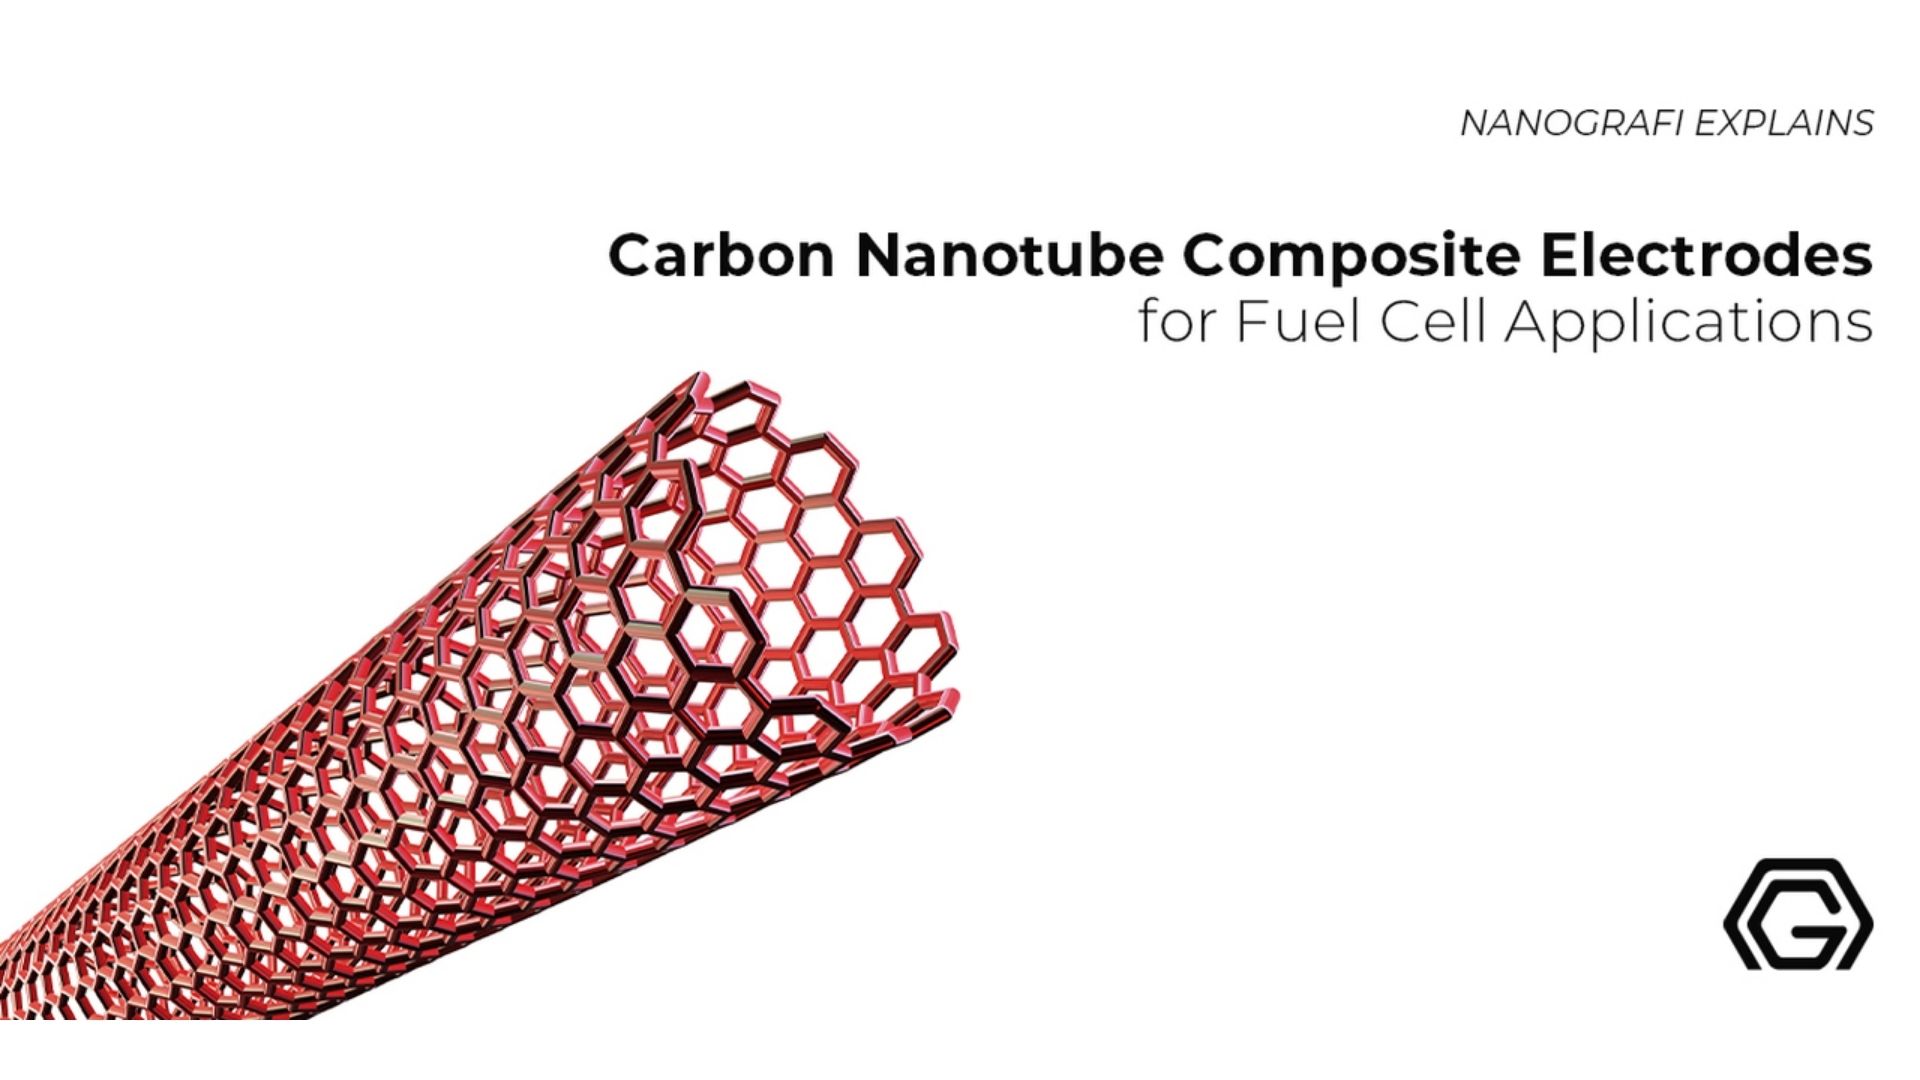 Discover more information about CNC Electrodes for Fuel Cell